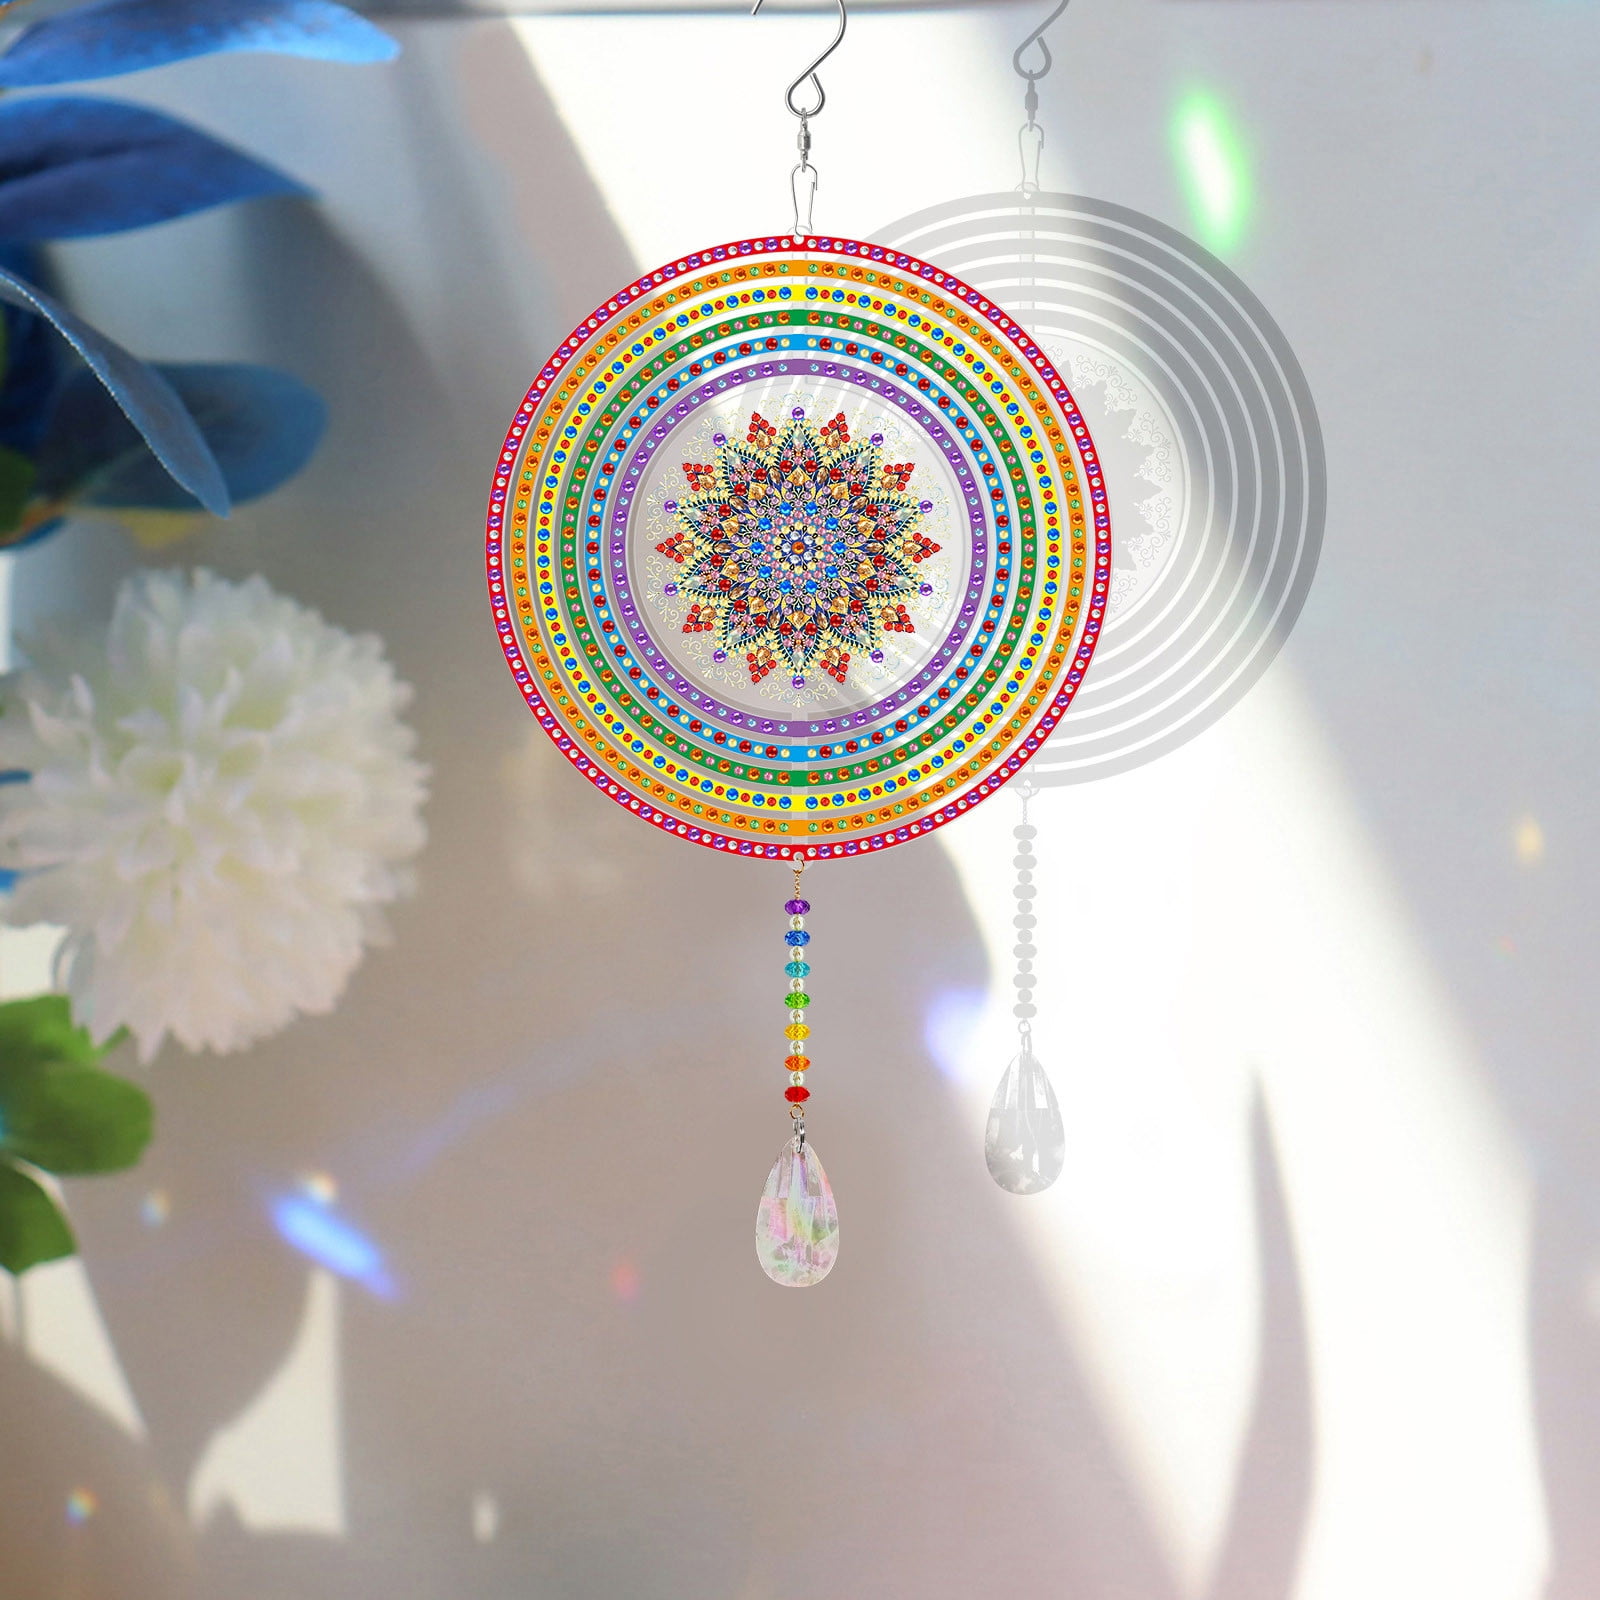 TERGAYEE Diamond Painting Suncatcher,Double Sided 3D Wind Chime